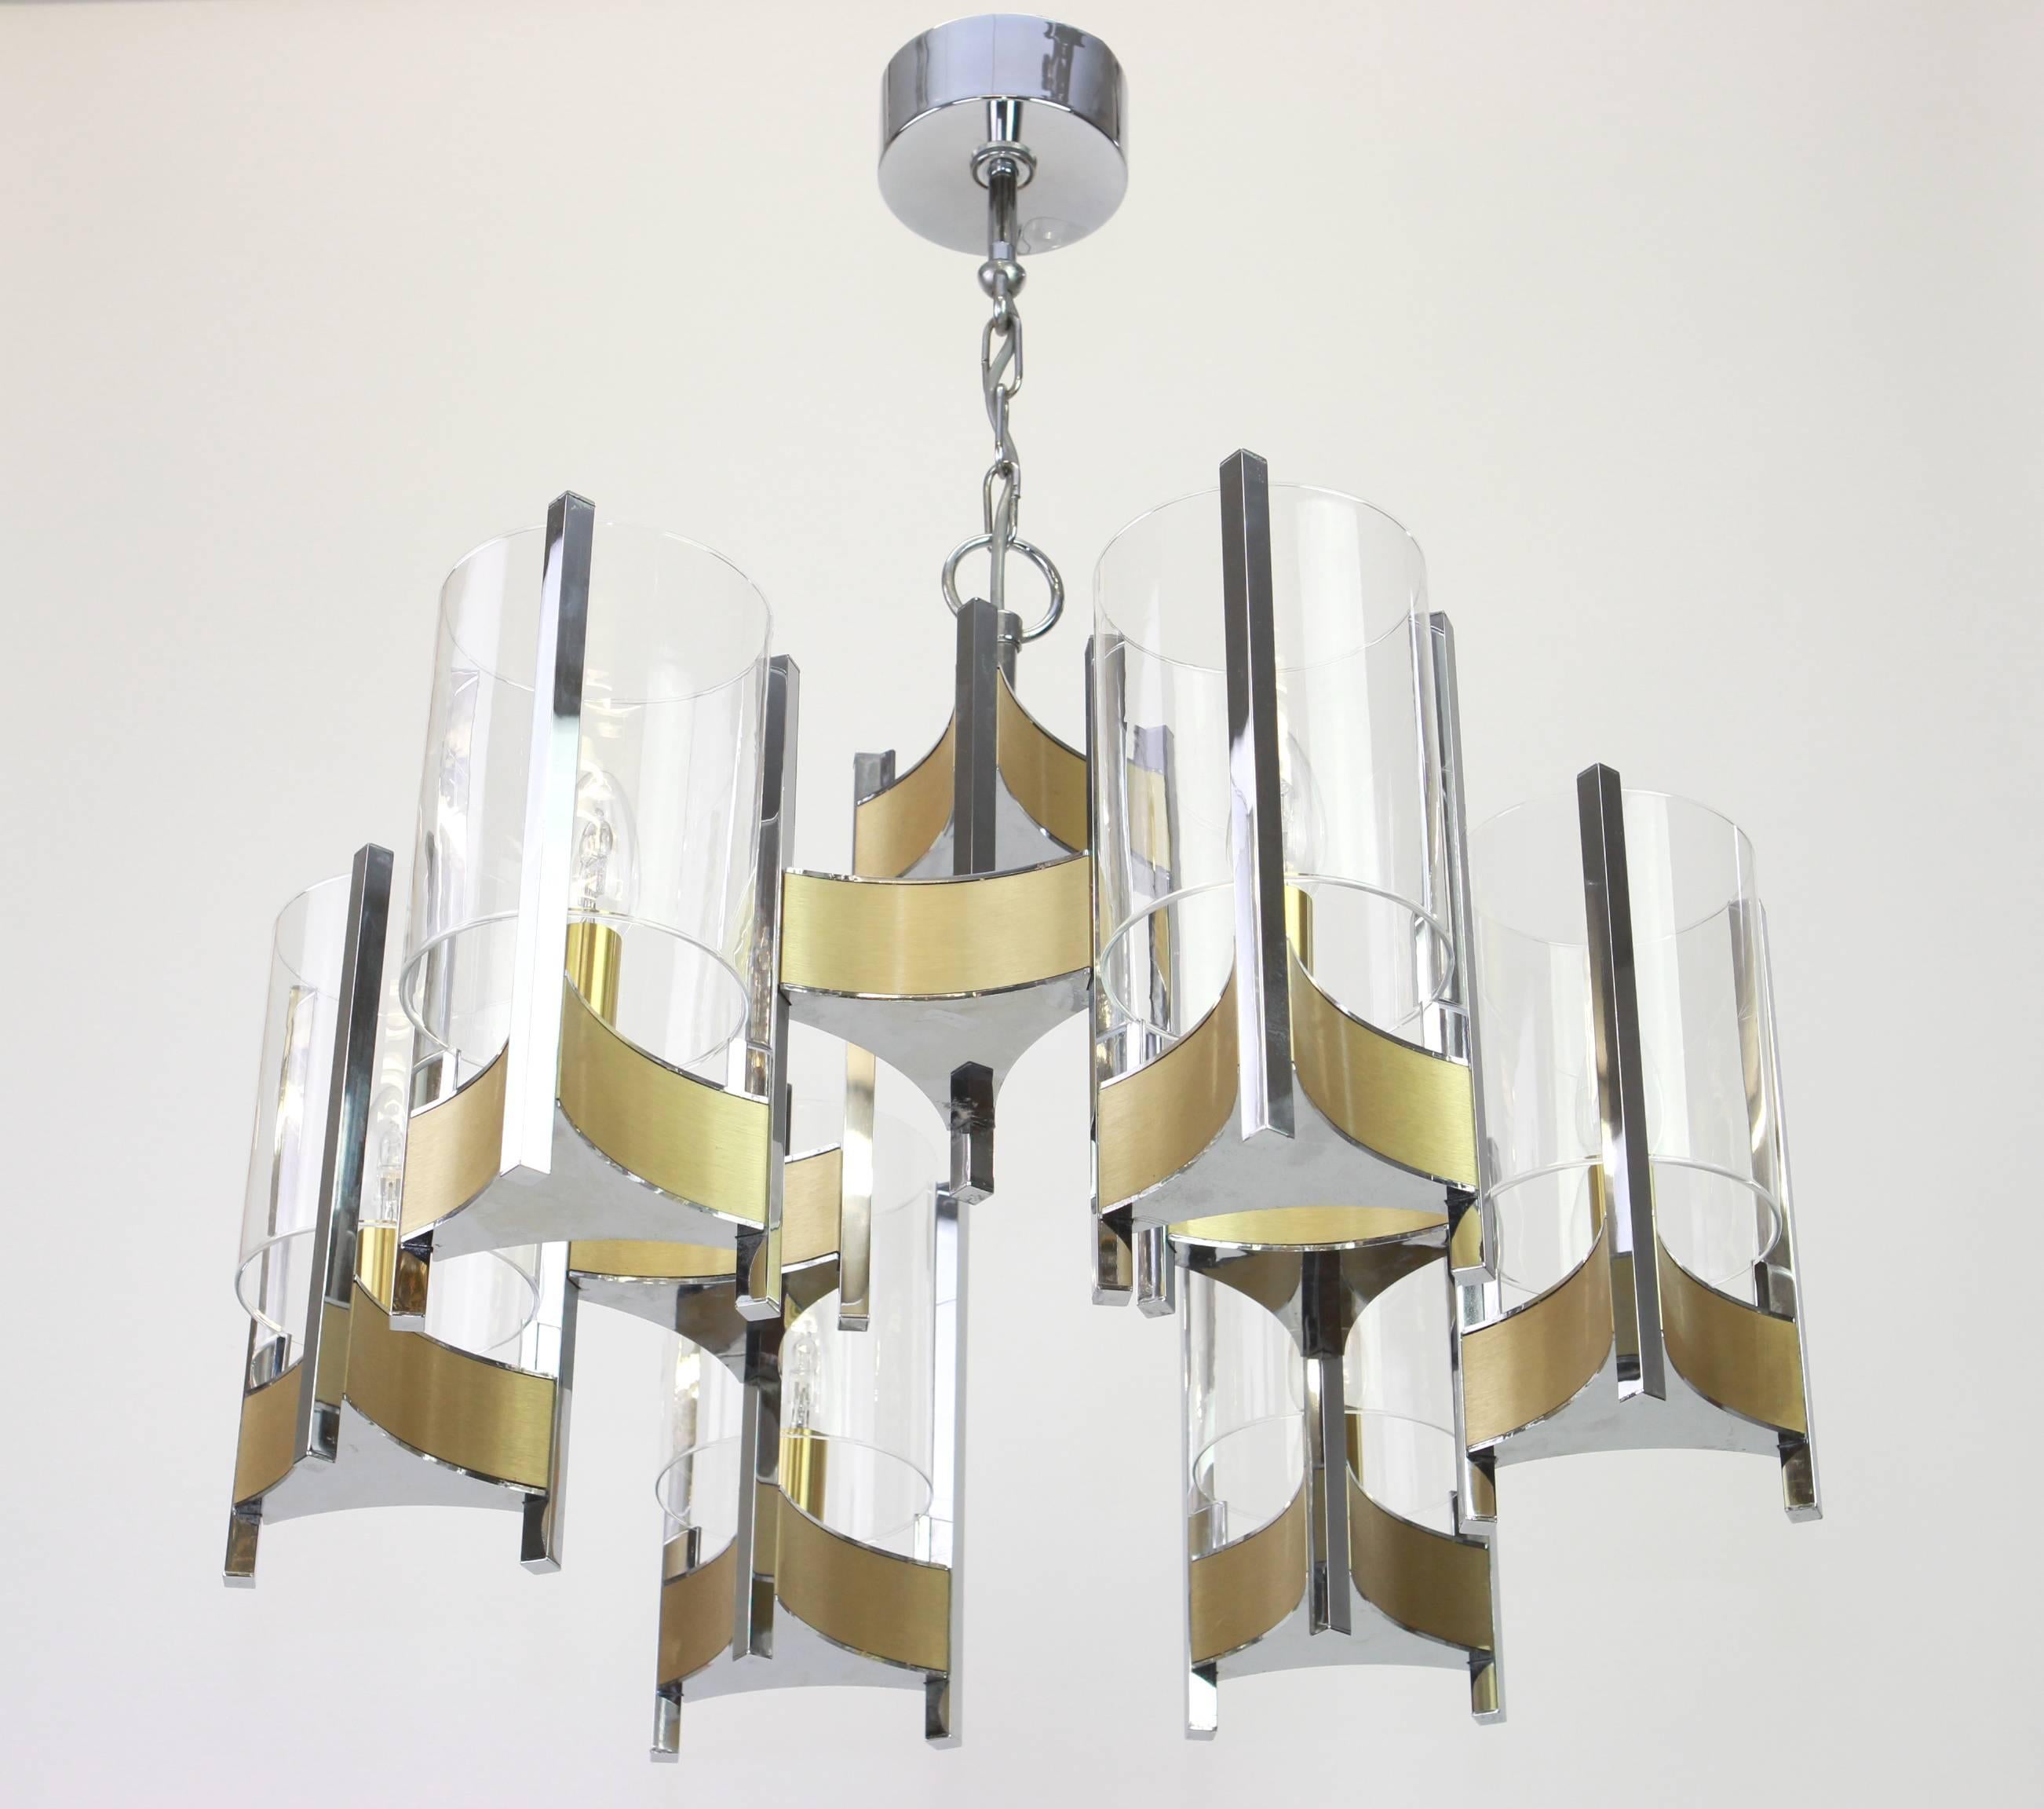 Six-light brass chandelier designed by Sciolari.
Brush brass, chrome, and round glass shades.
Made with brass, best of the 1960s.
High quality and in very good condition. Cleaned, well-wired and ready to use. 

The fixture requires 6 x E14